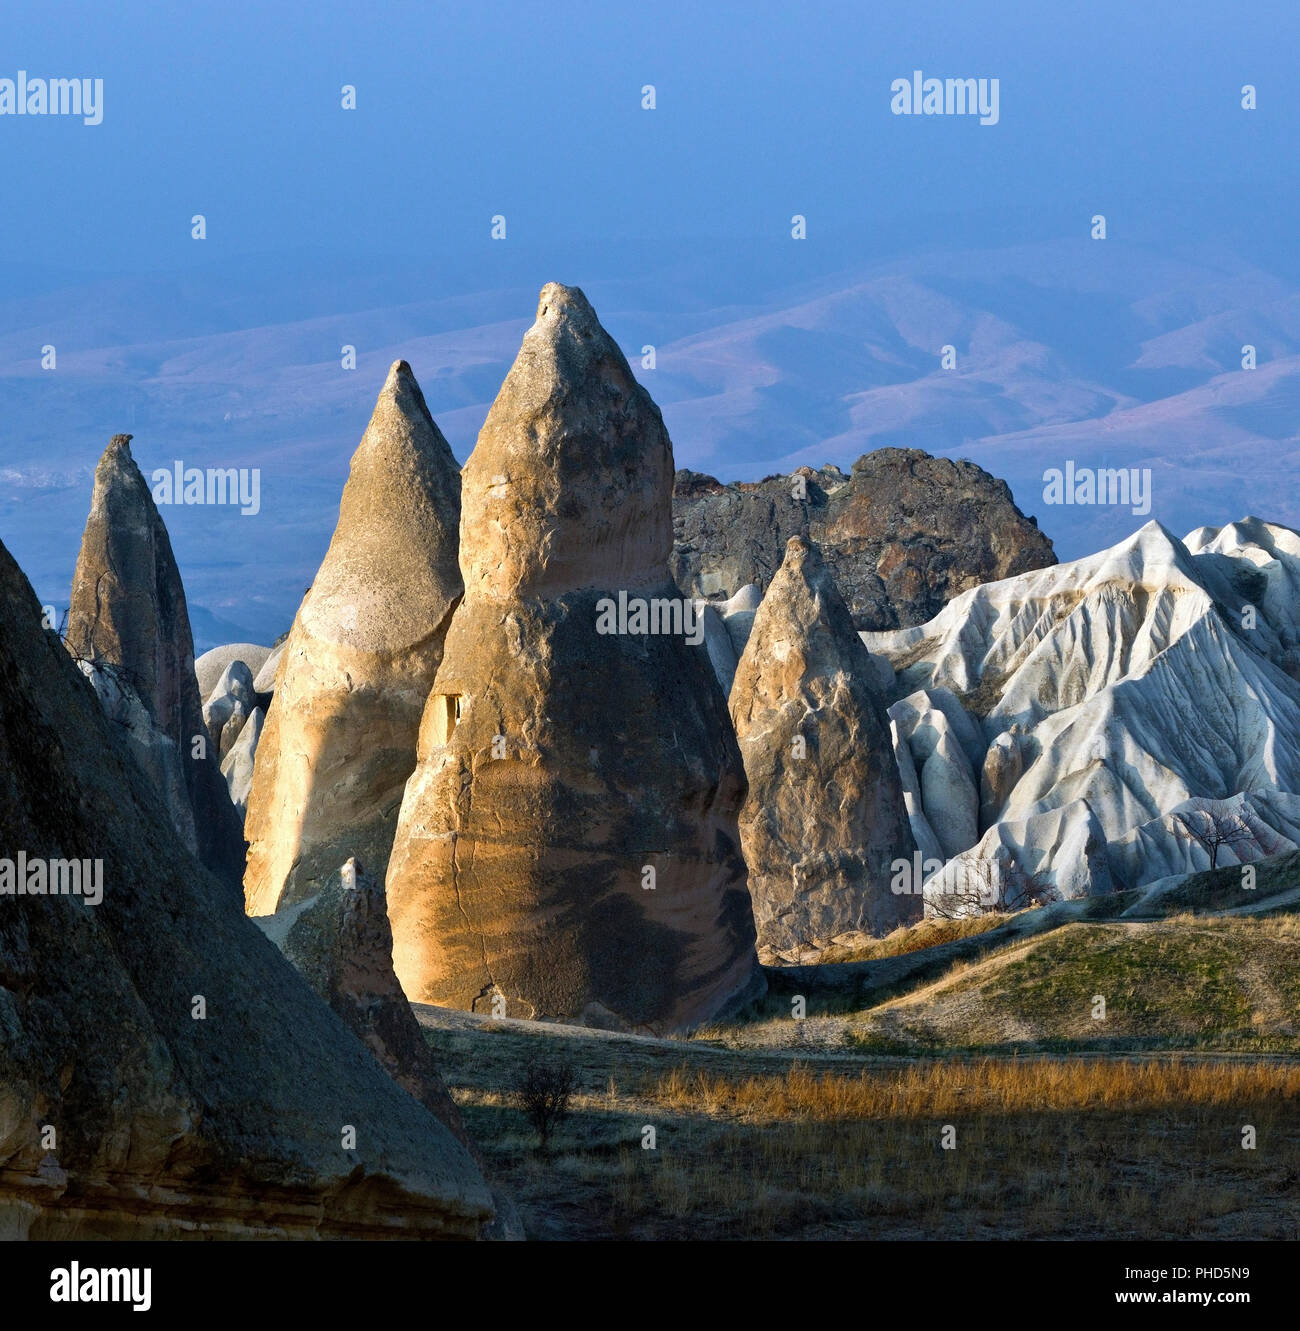 Rock formations known as fairy chimneys in the Rose Valley, Cappadocia, Turkey Stock Photo